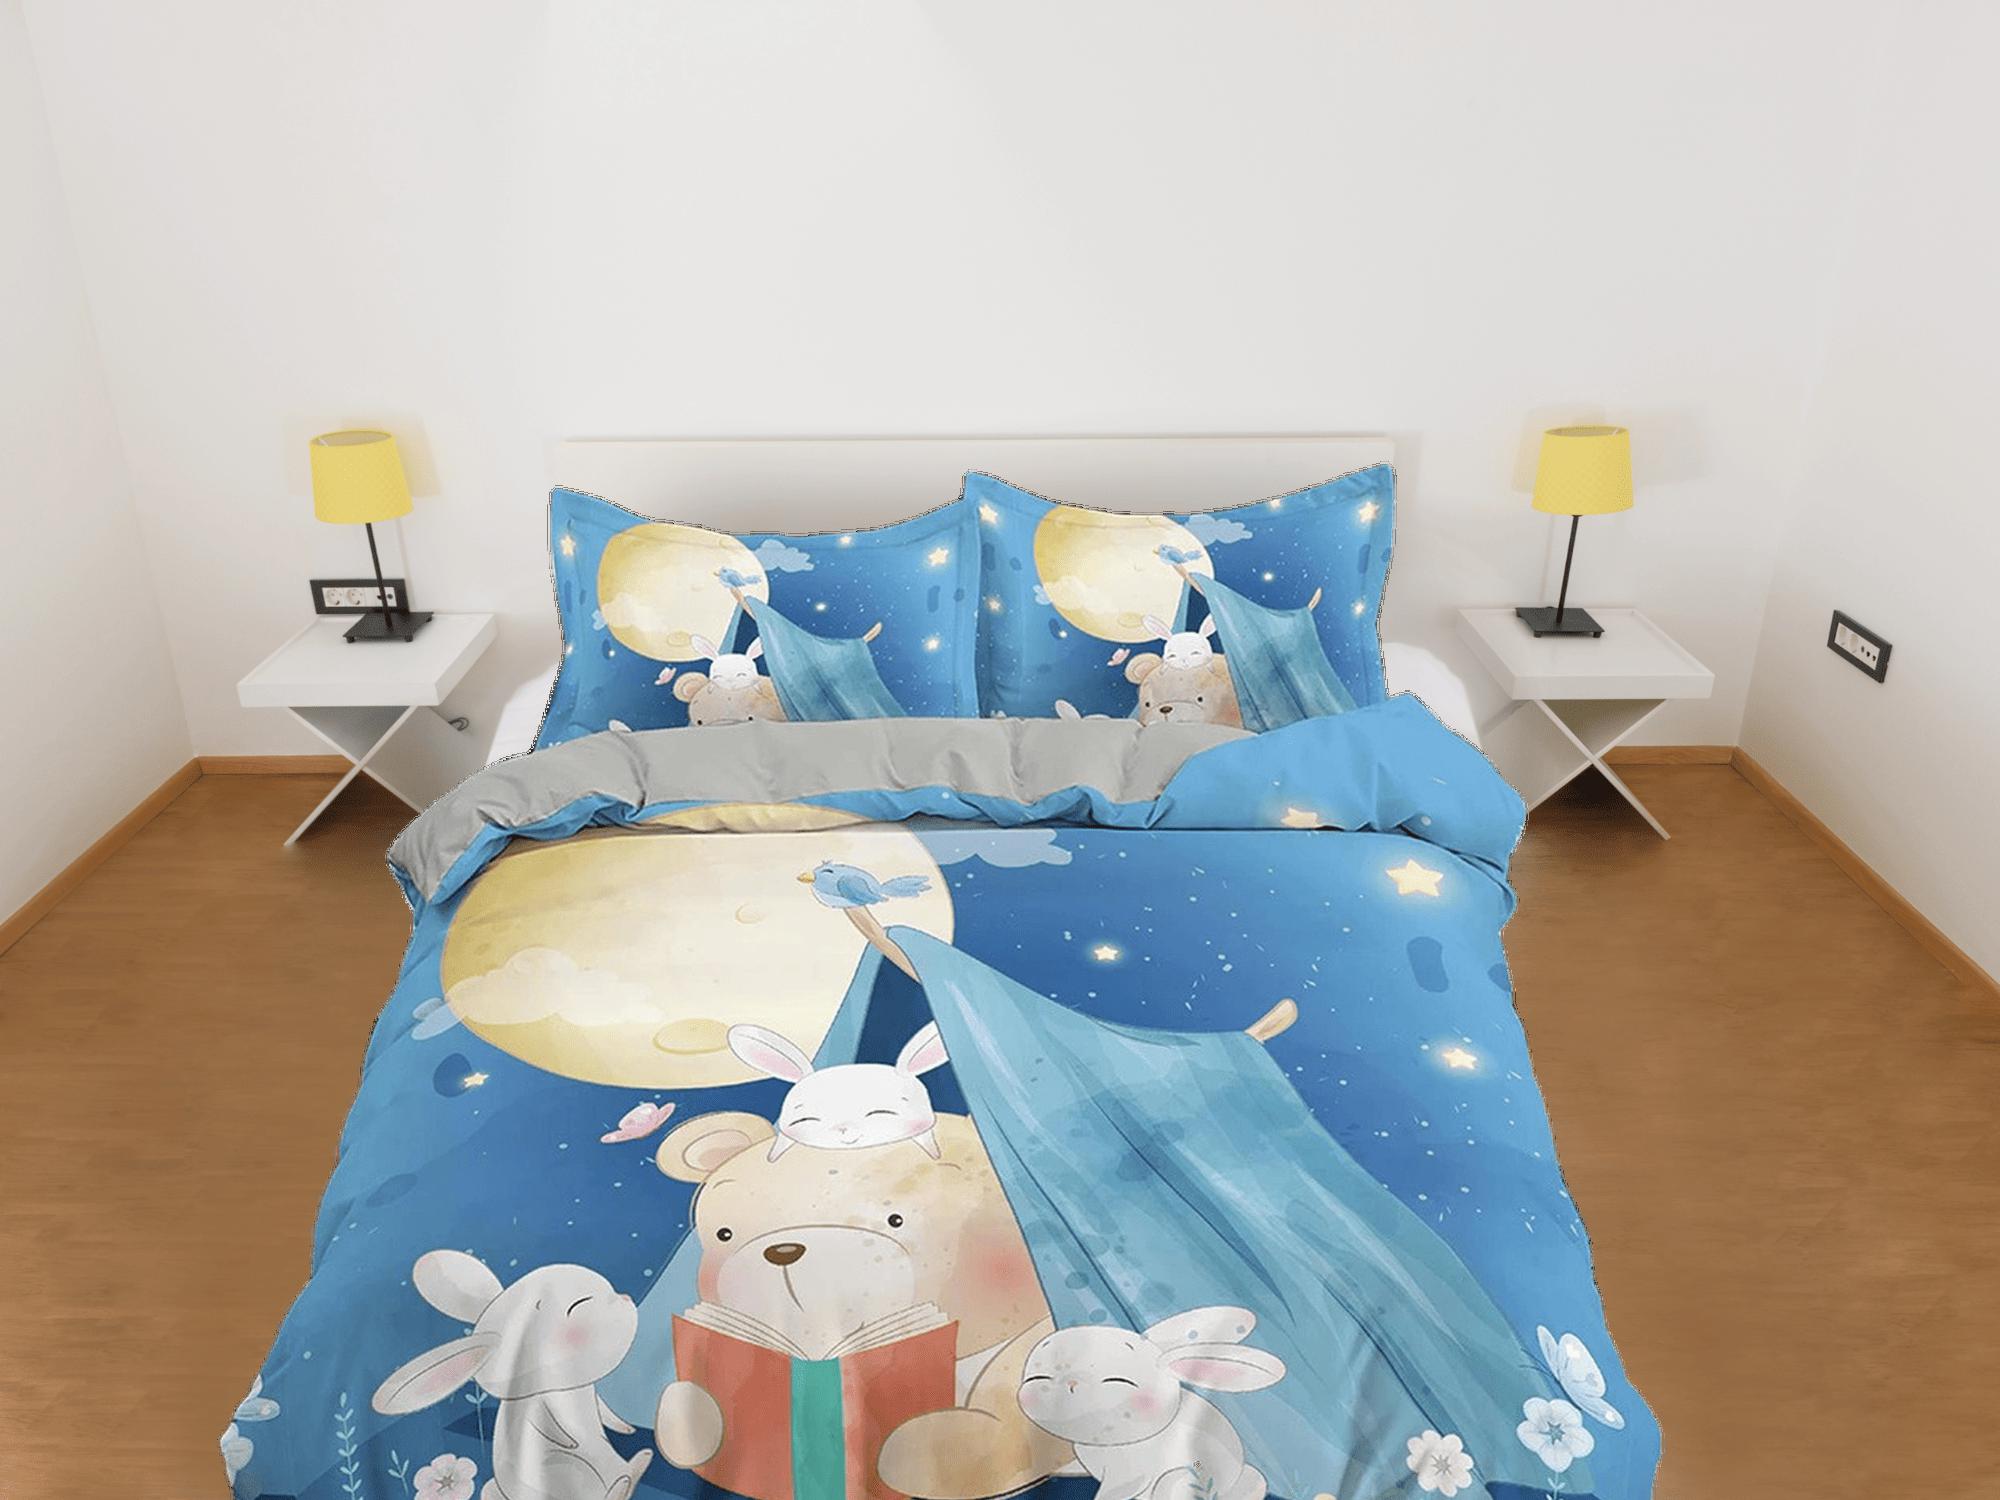 daintyduvet Cute teddy bear and bunny night camp toddler bedding, duvet cover for nursery kids, crib bedding, baby zipper bedding, king queen full twin